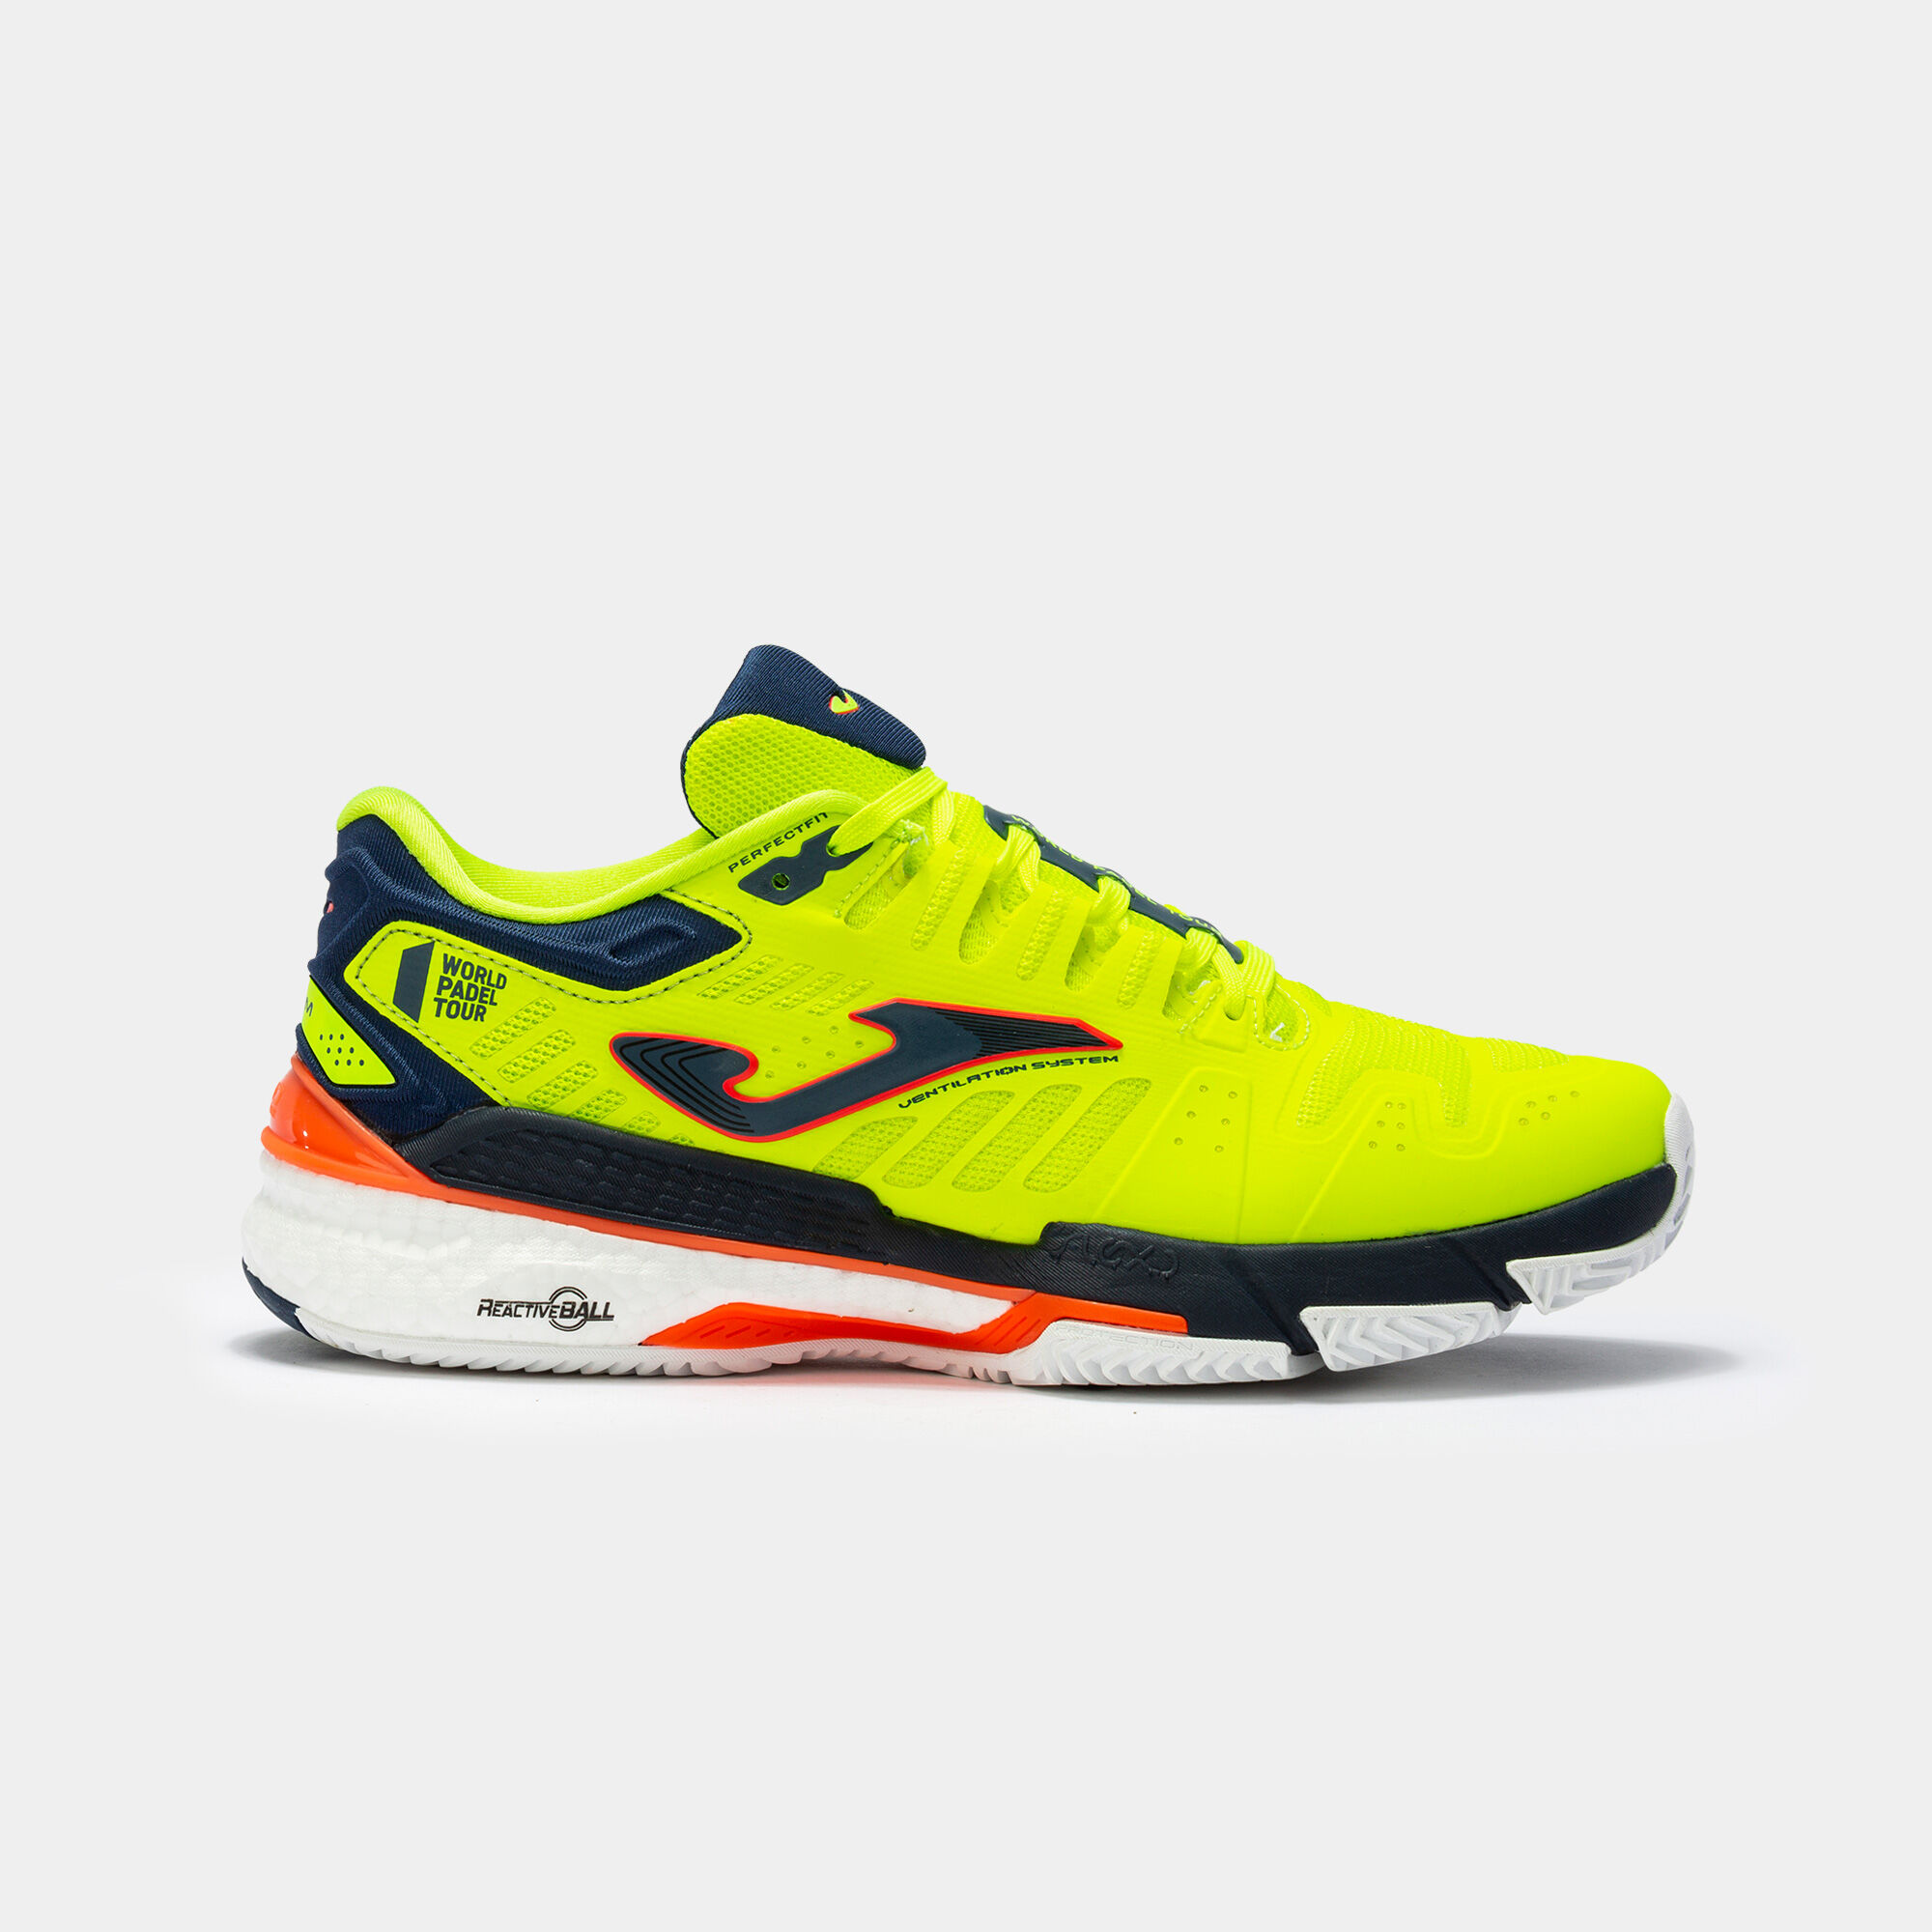 SHOES SLAM 22 CLAY MAN FLUORESCENT YELLOW NAVY BLUE